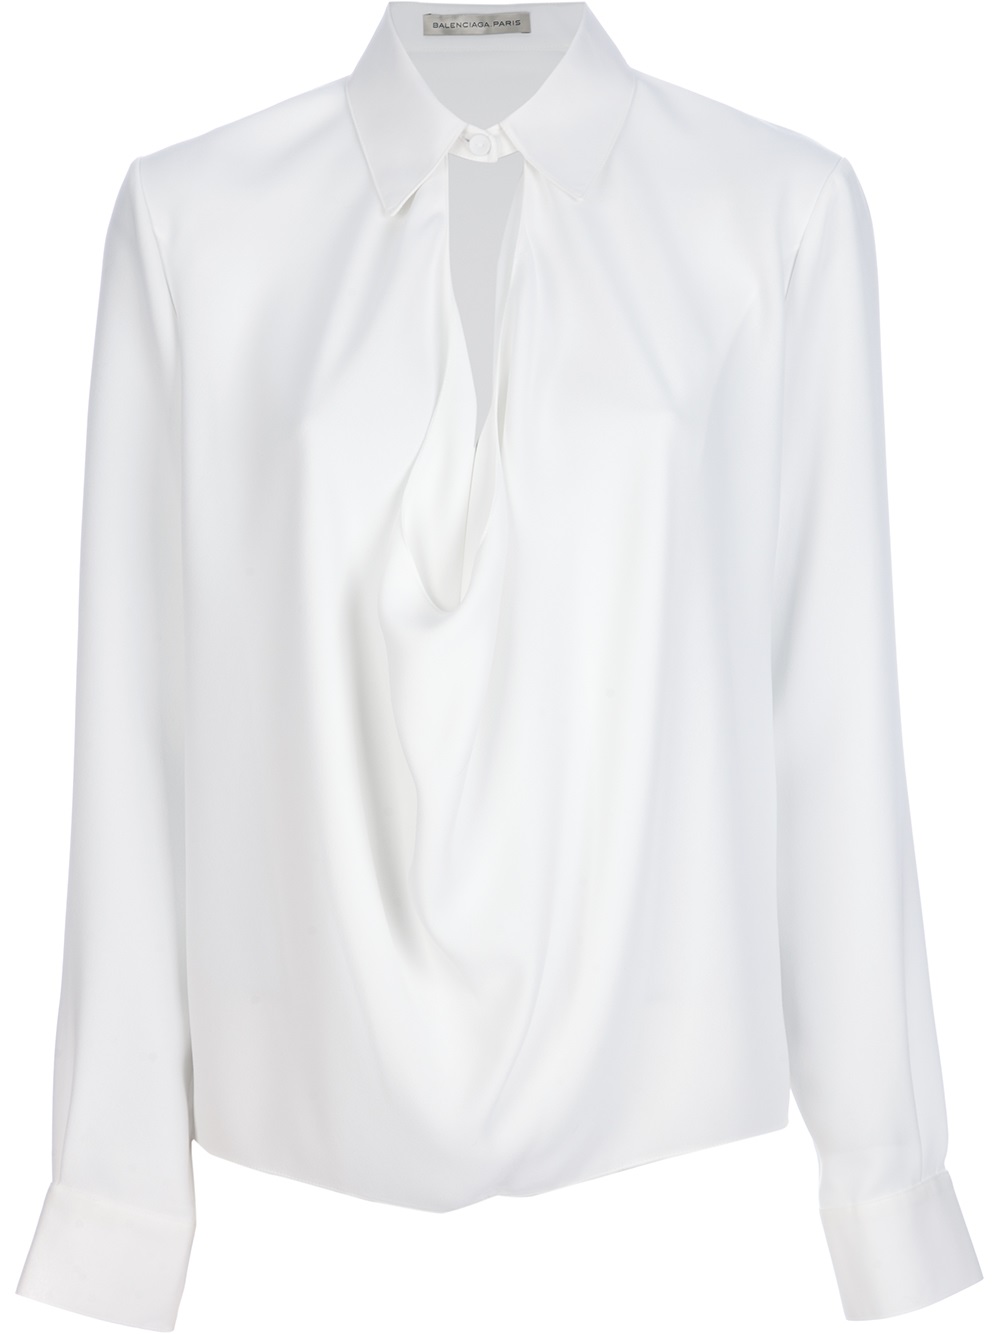 Lyst - Balenciaga Loose Fit Blouse in White